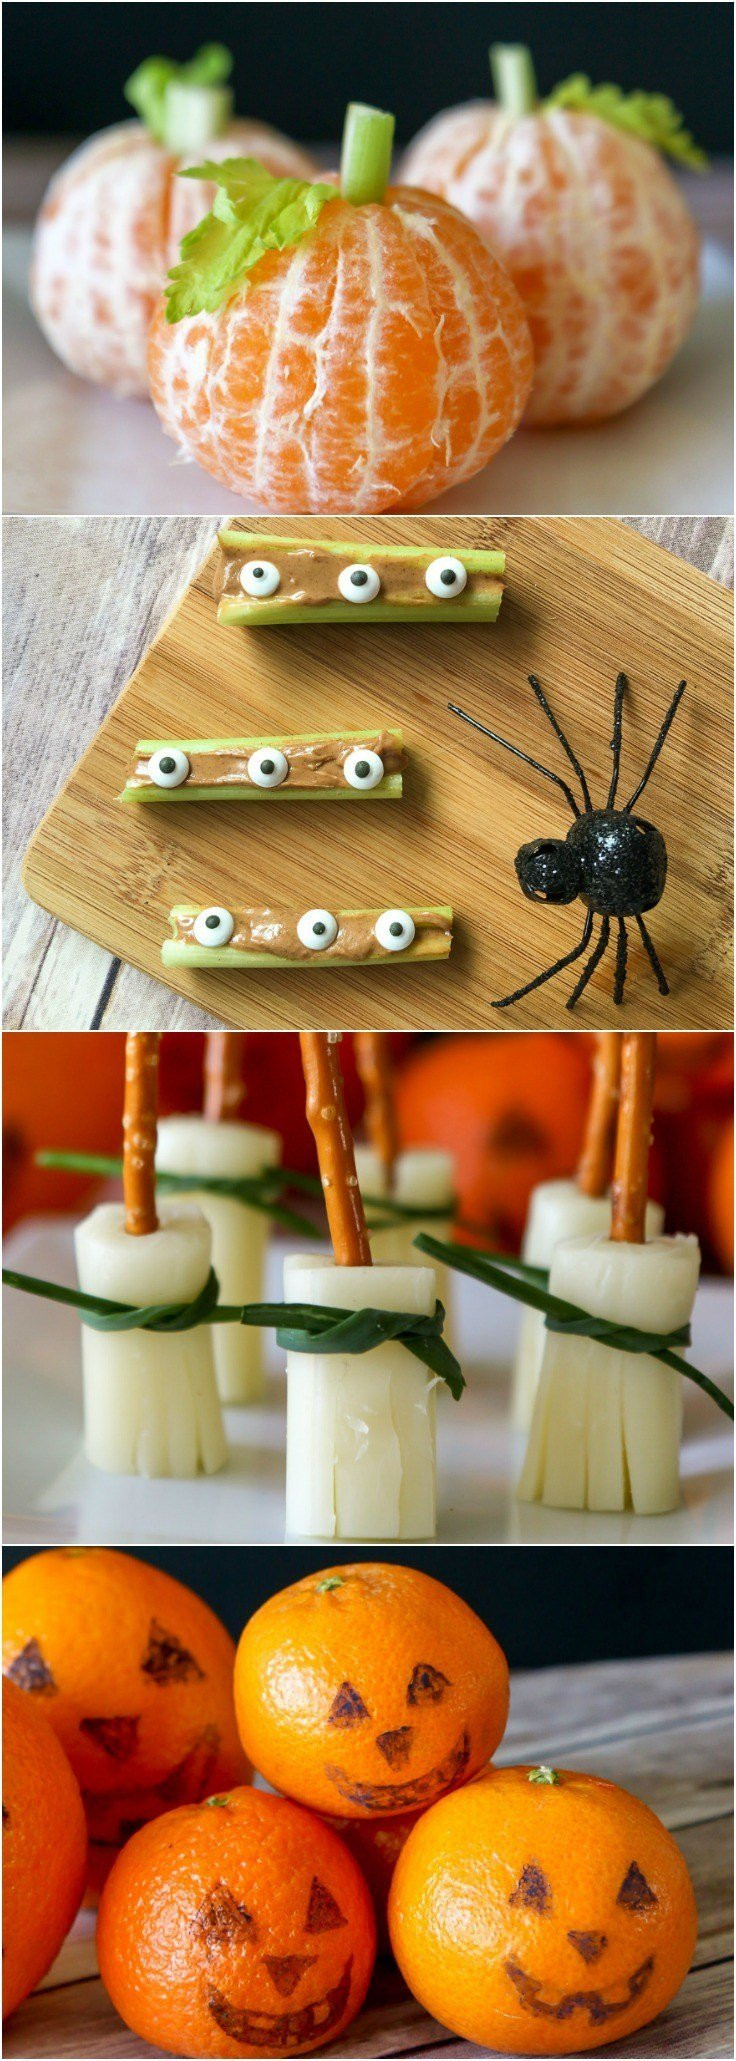 Healthy Halloween Snacks For Kids
 5 Easy and Healthy Halloween Snacks for Kids La Jolla Mom